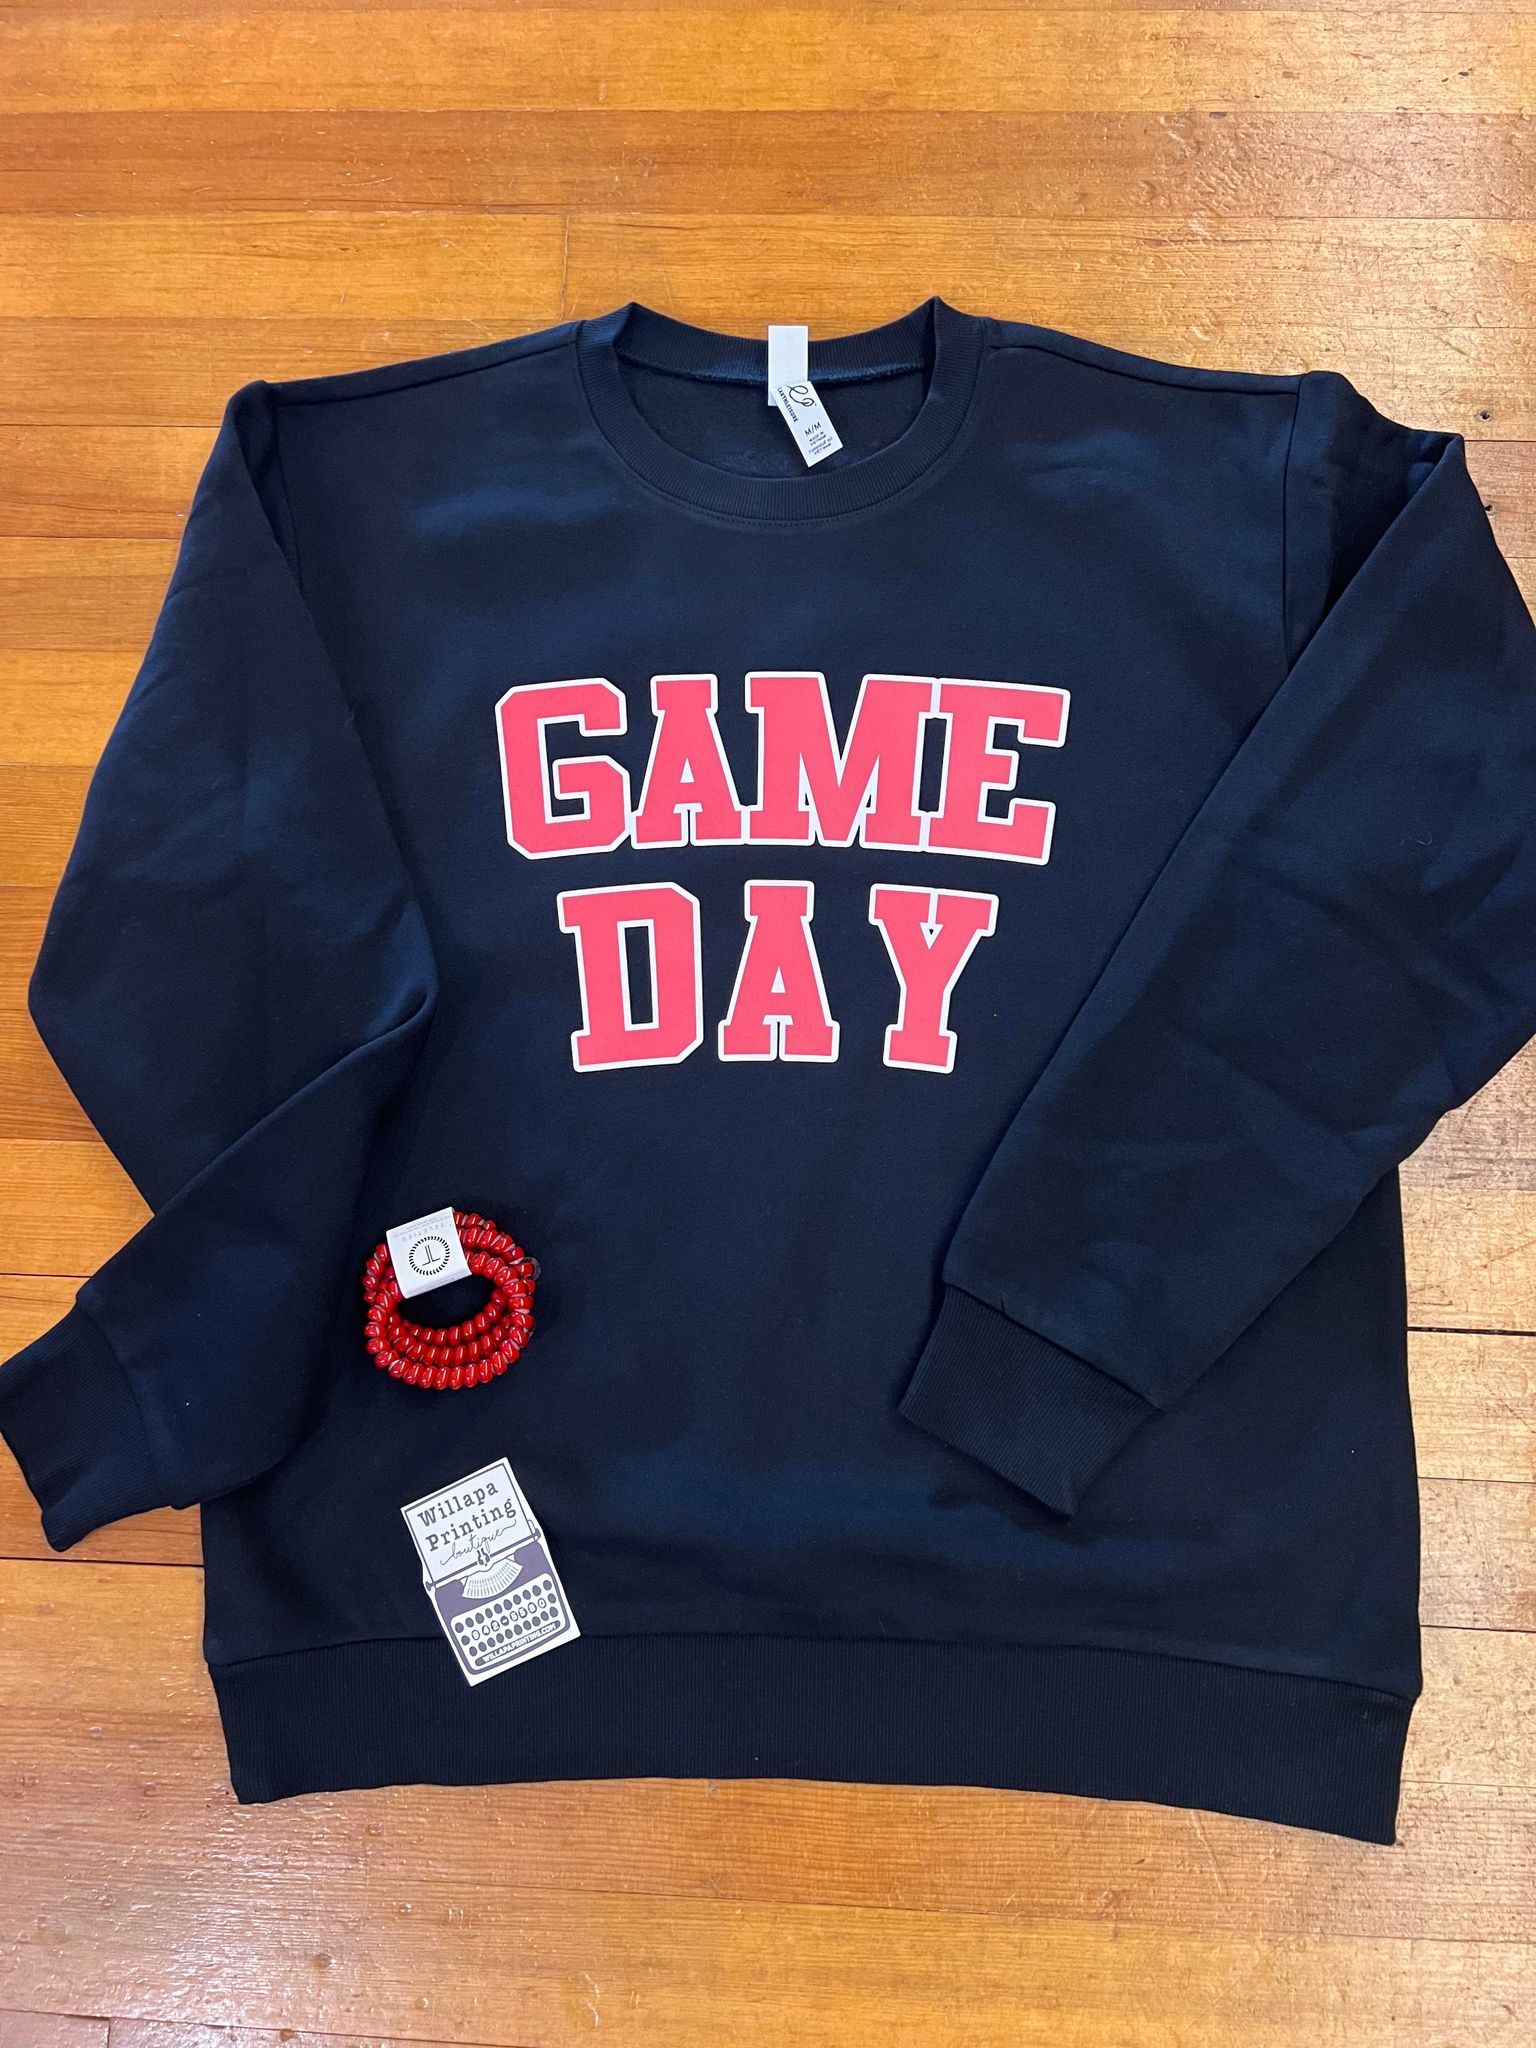 BLACK WITH RED AND WHITE GAME DAY CREWNECK SWEATSHIRT